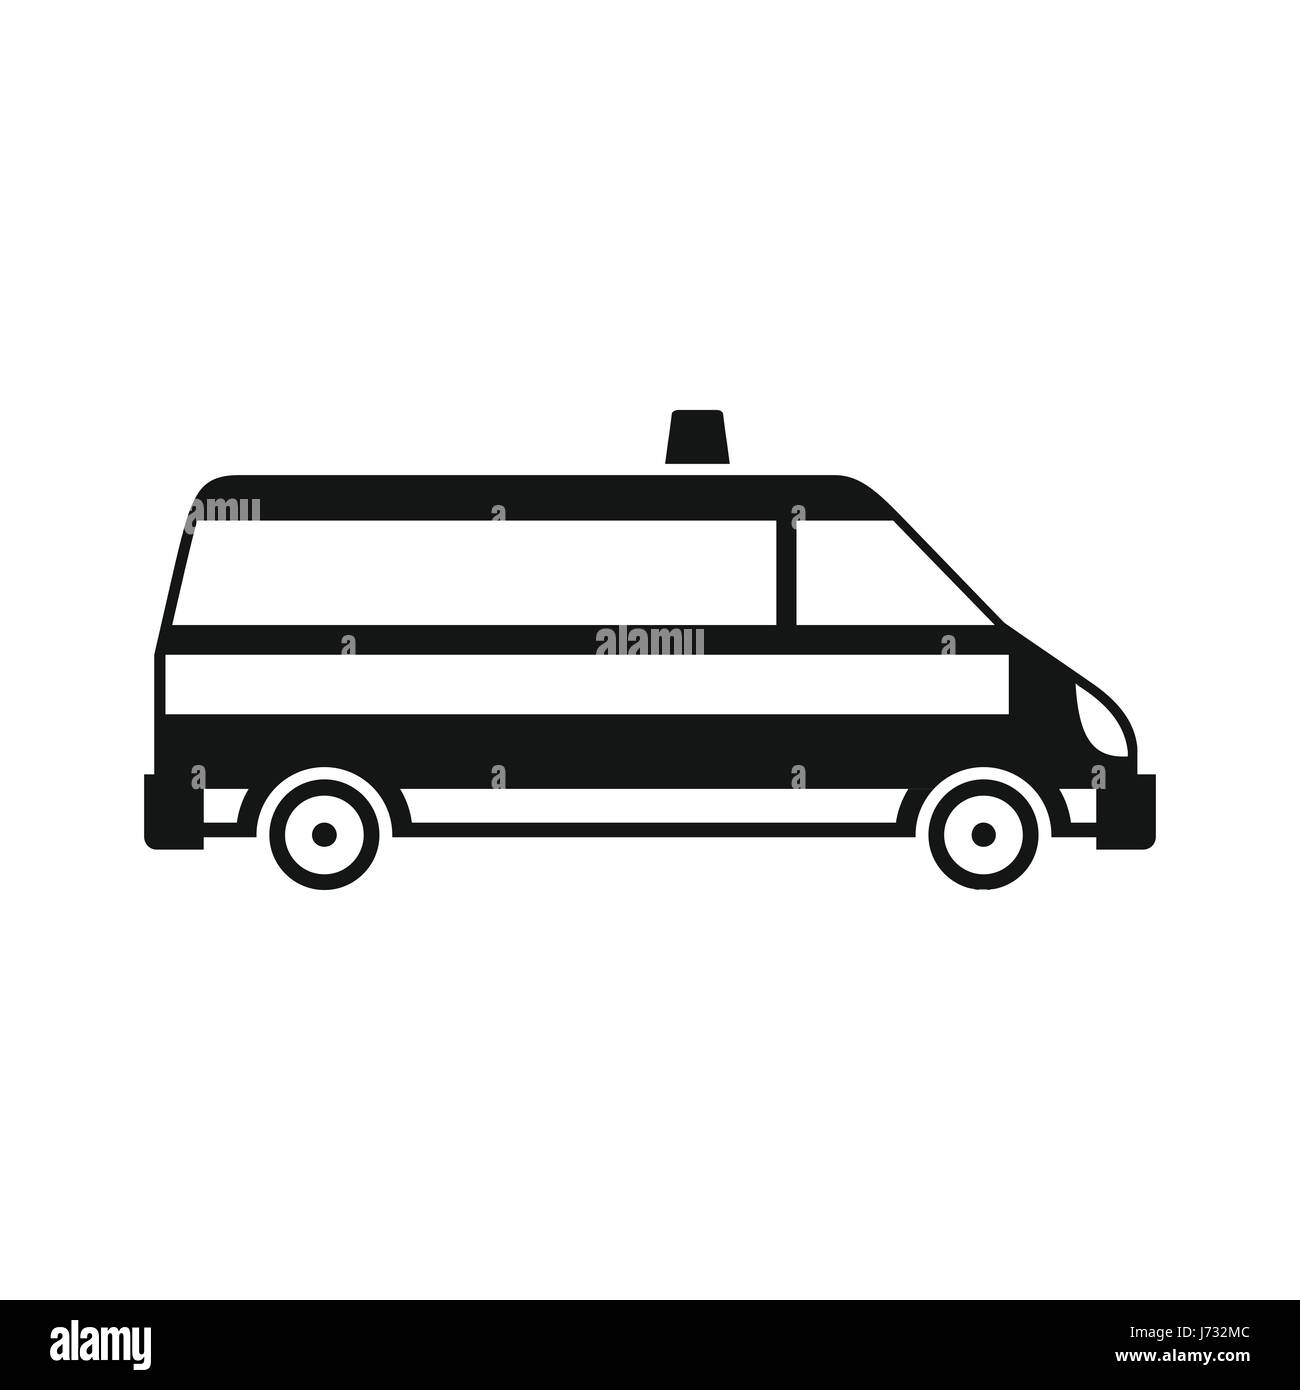 Ambulance car icon, simple style Stock Vector